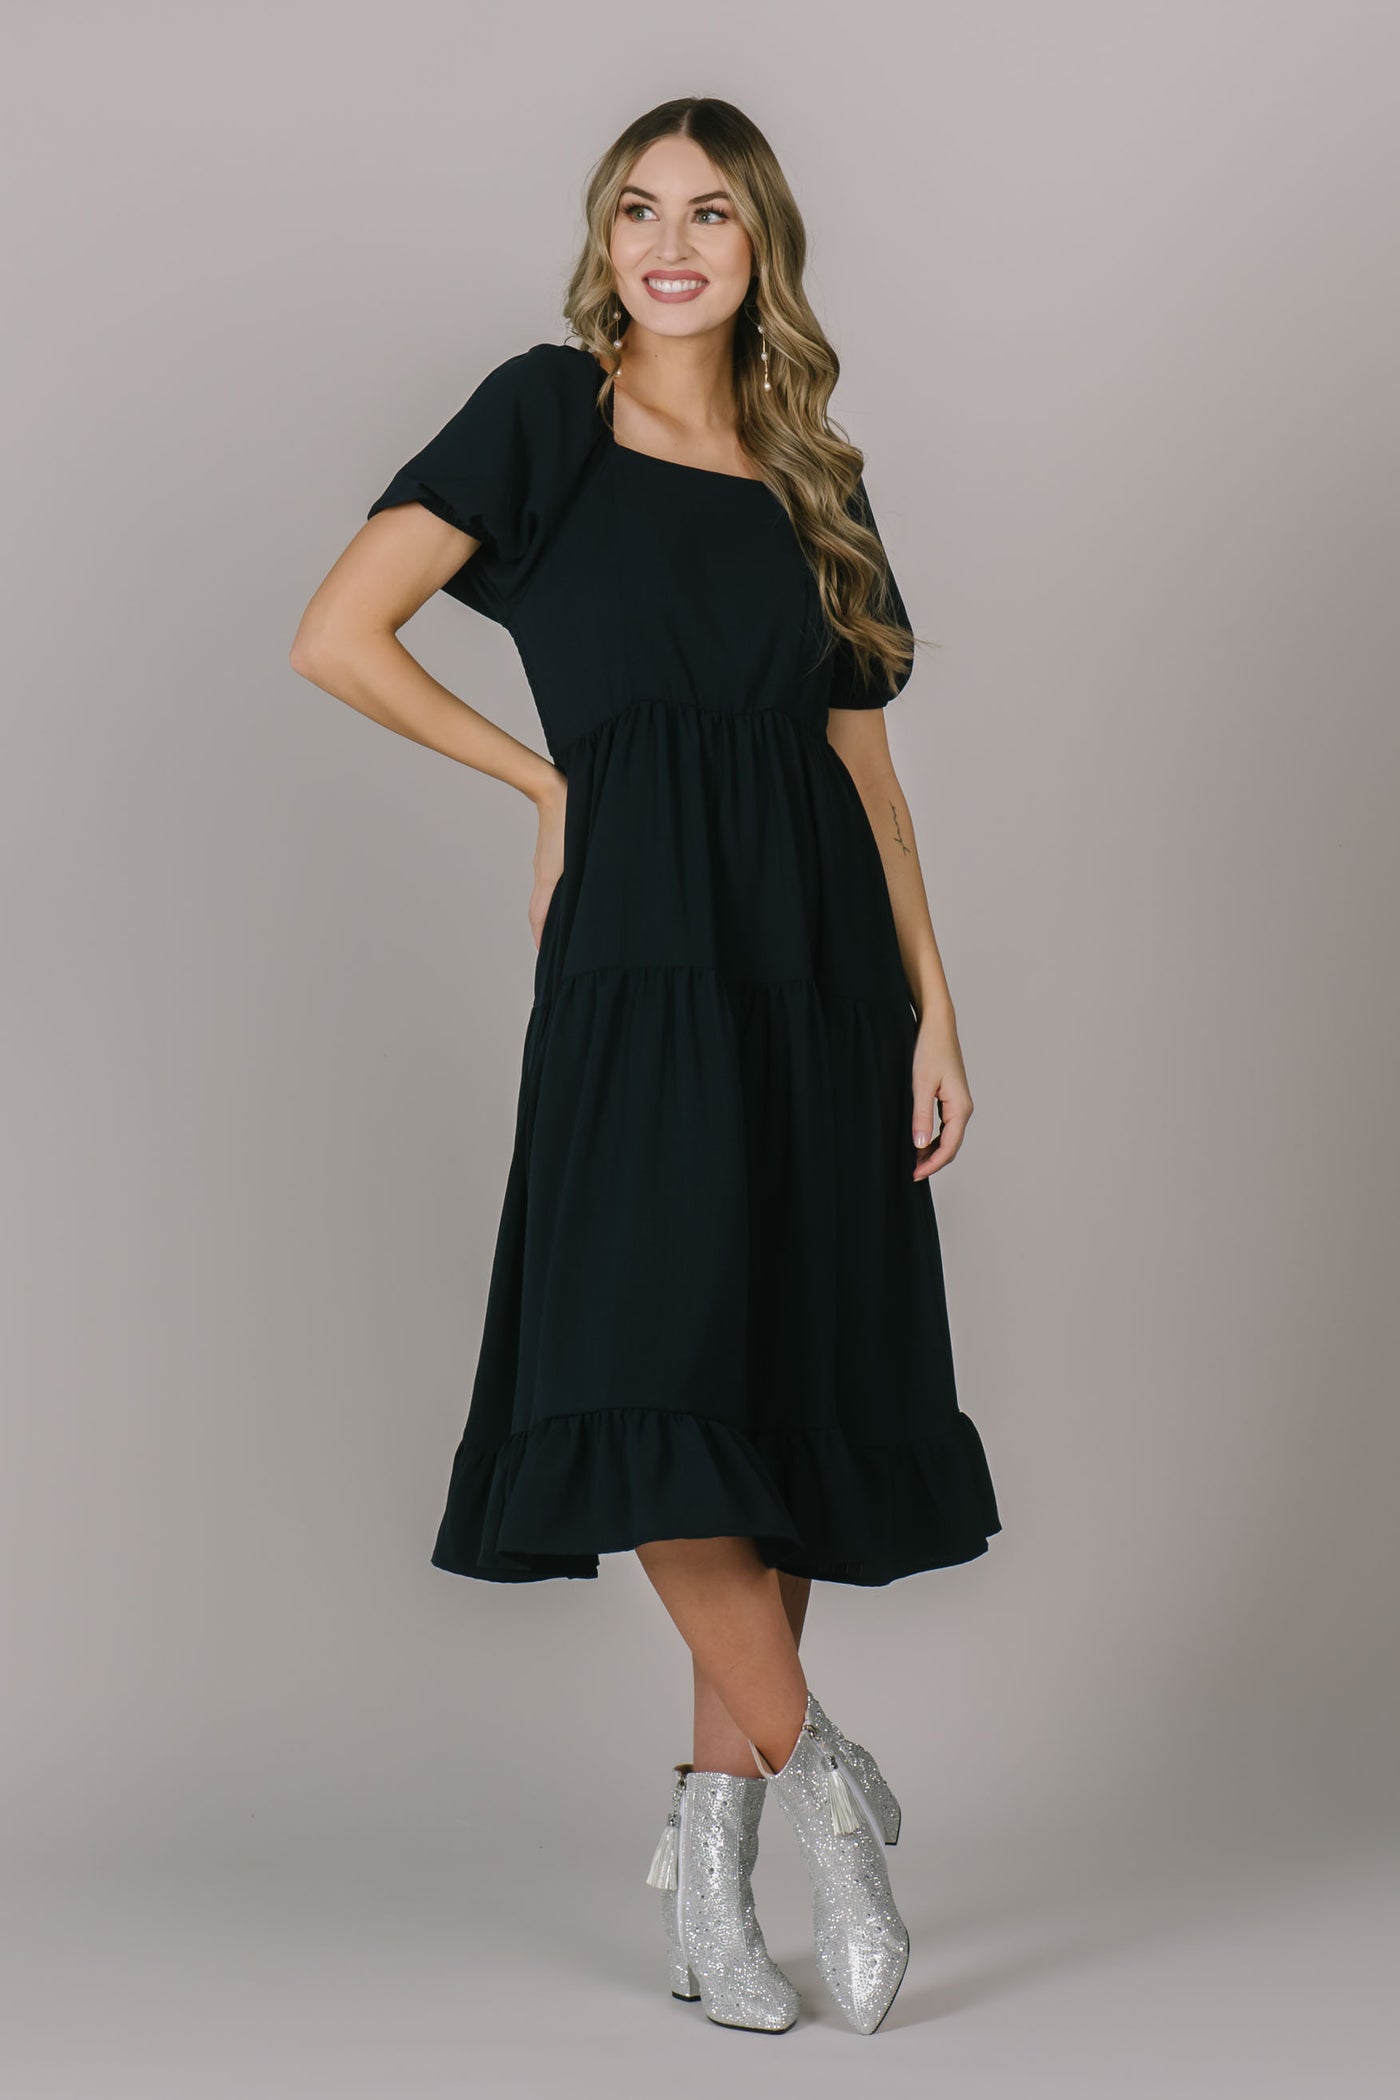 Modest dress in Utah with a flowy puff sleeve, a flattering square neck, and a flowy tiered skirt.